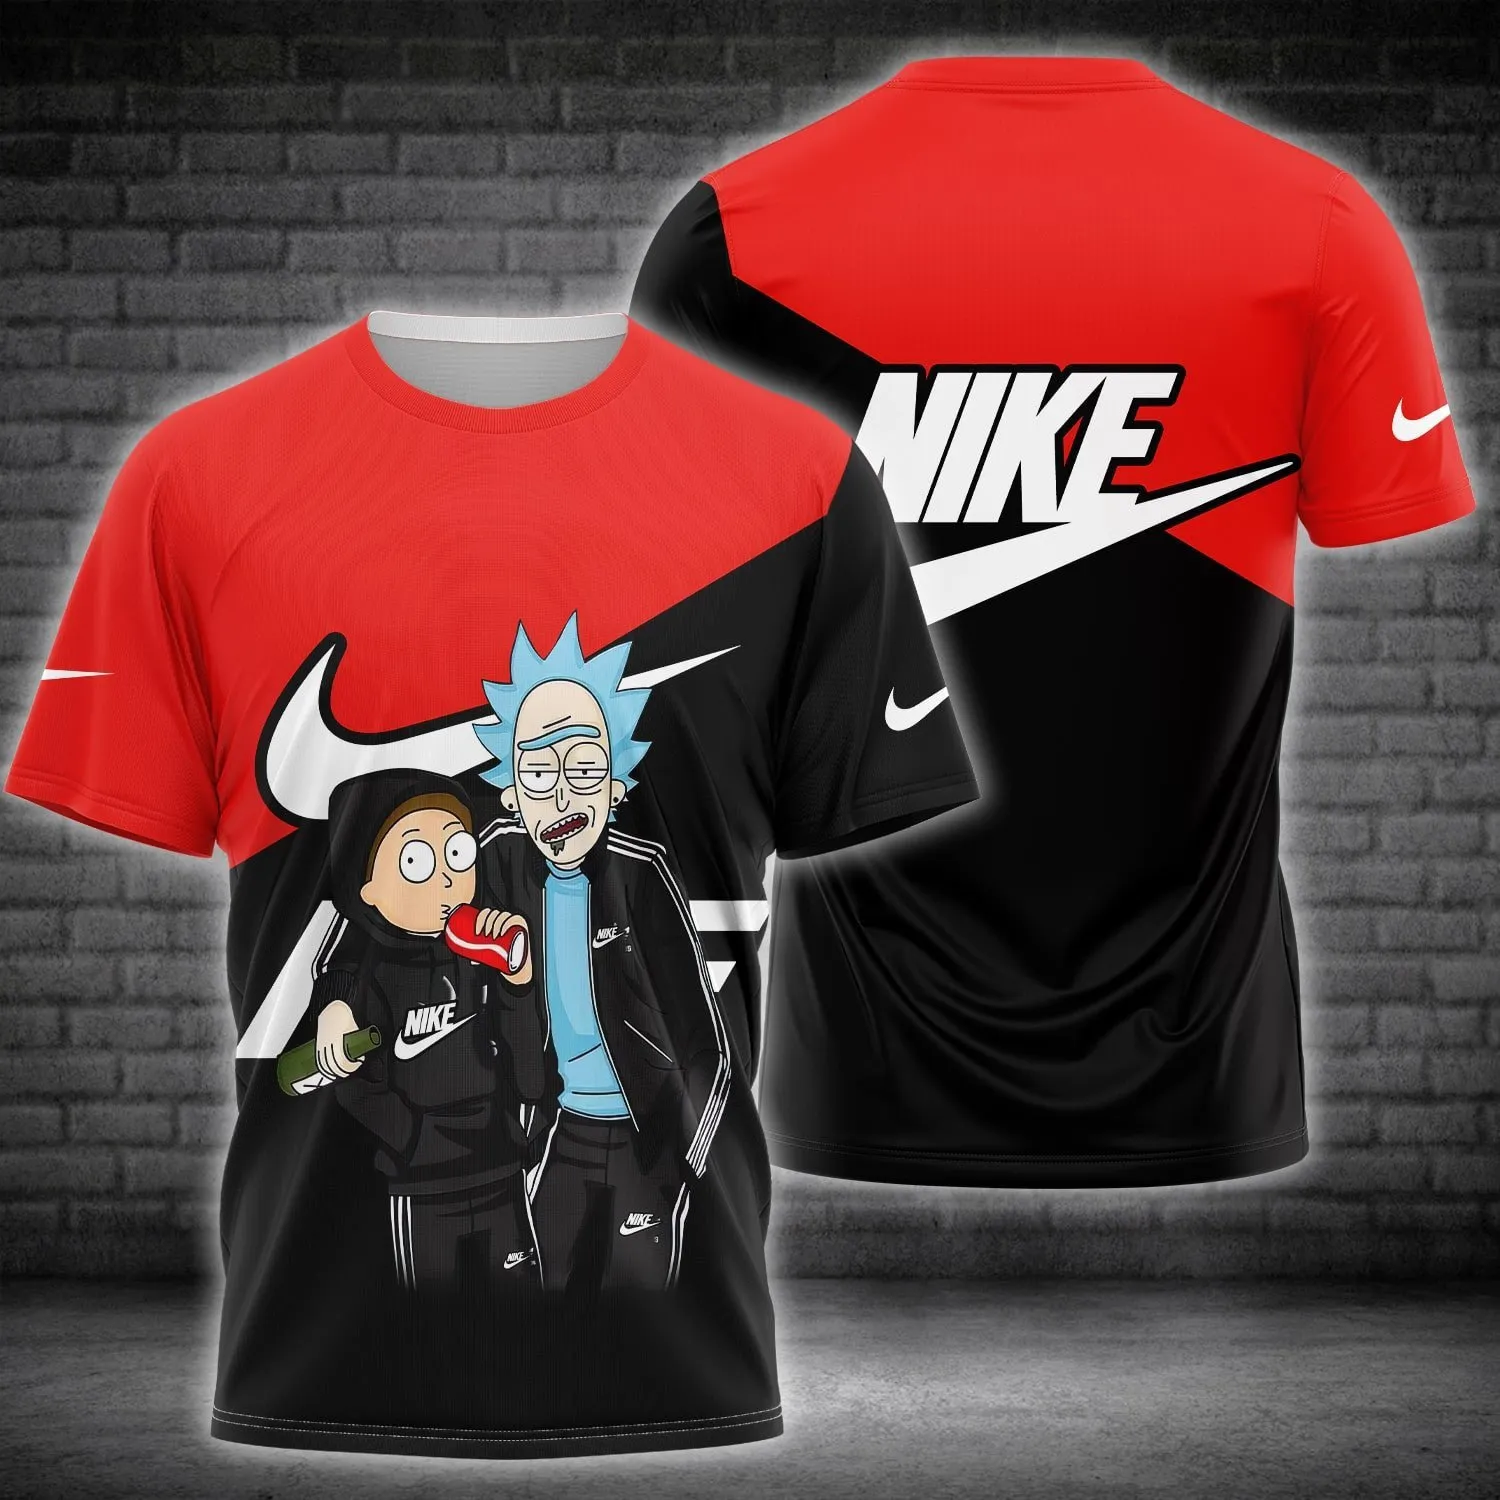 Nike Rick And Morty T Shirt Outfit Luxury Fashion